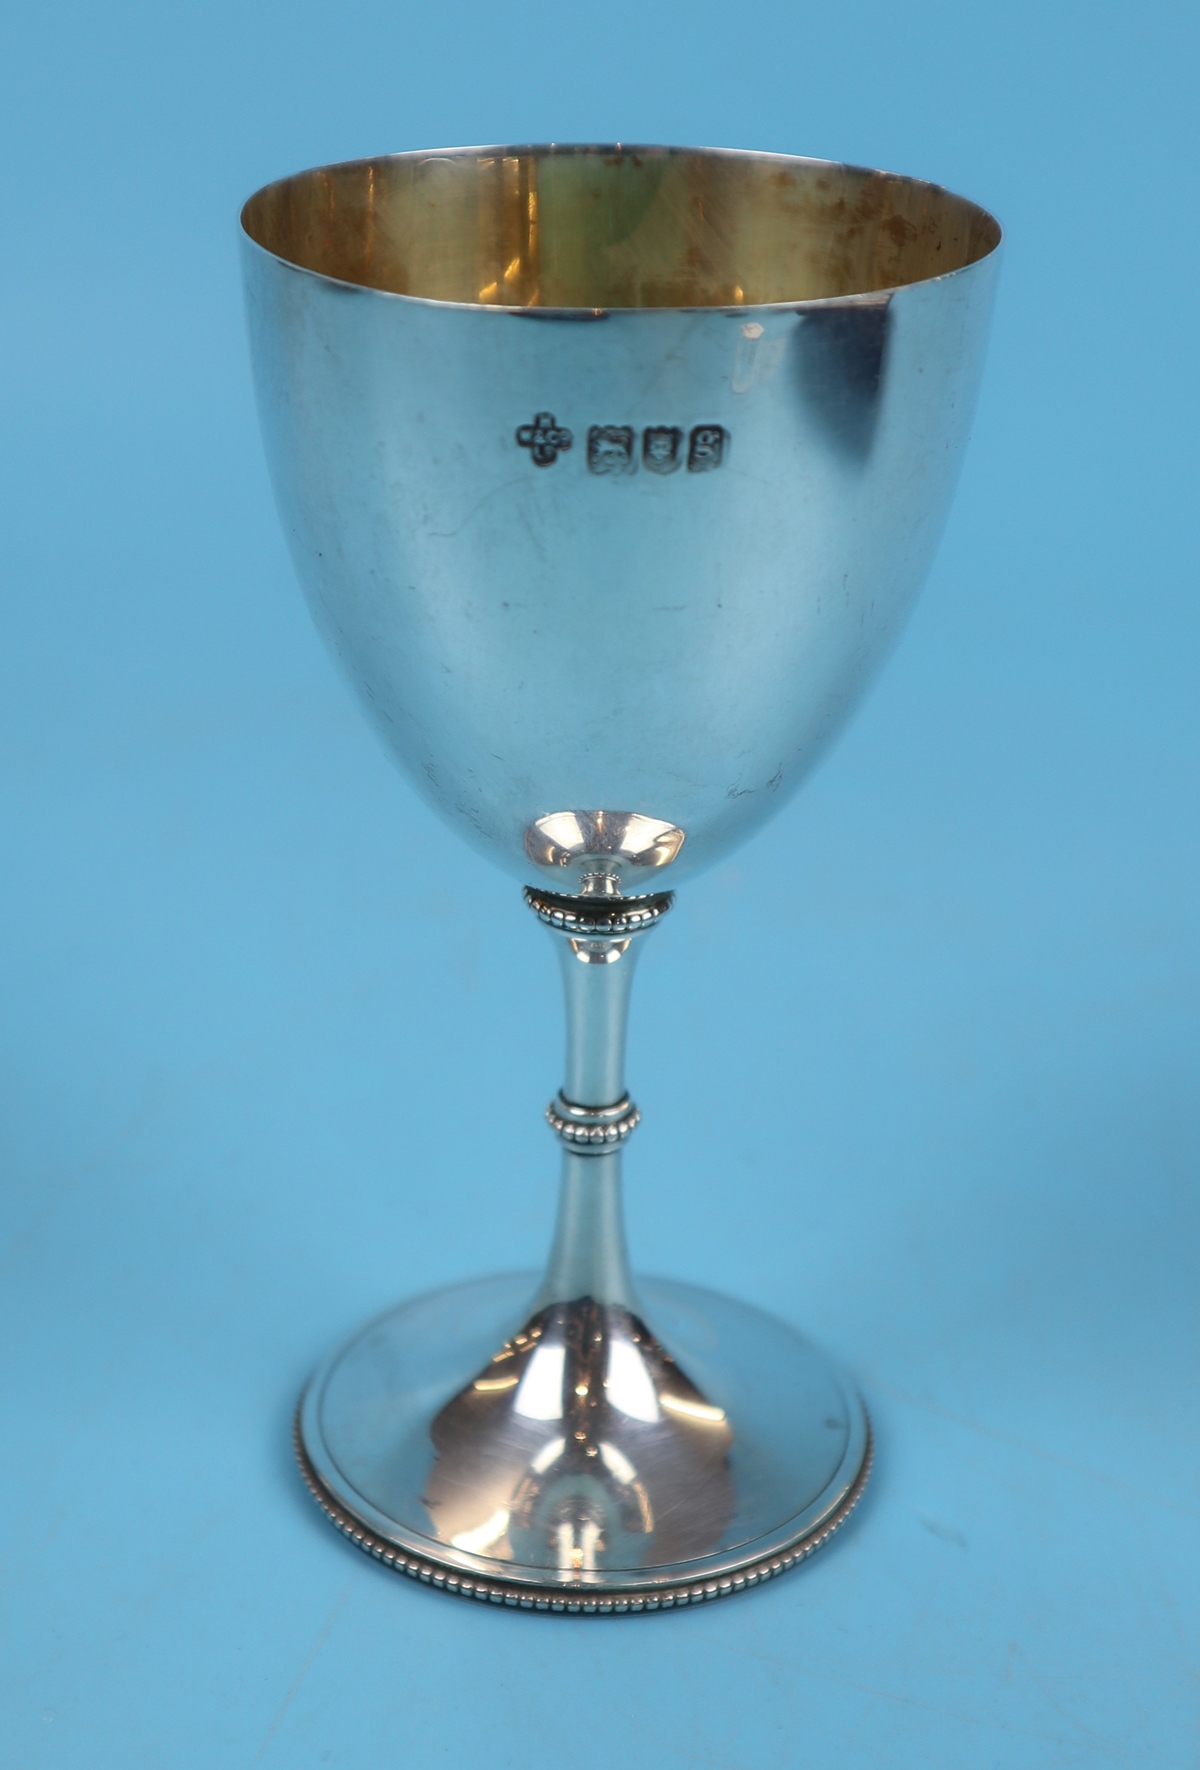 Hallmarked silver cup - The Denis O'Sullivan cup 1906 - Approx weight 102g, H: 12.5cm